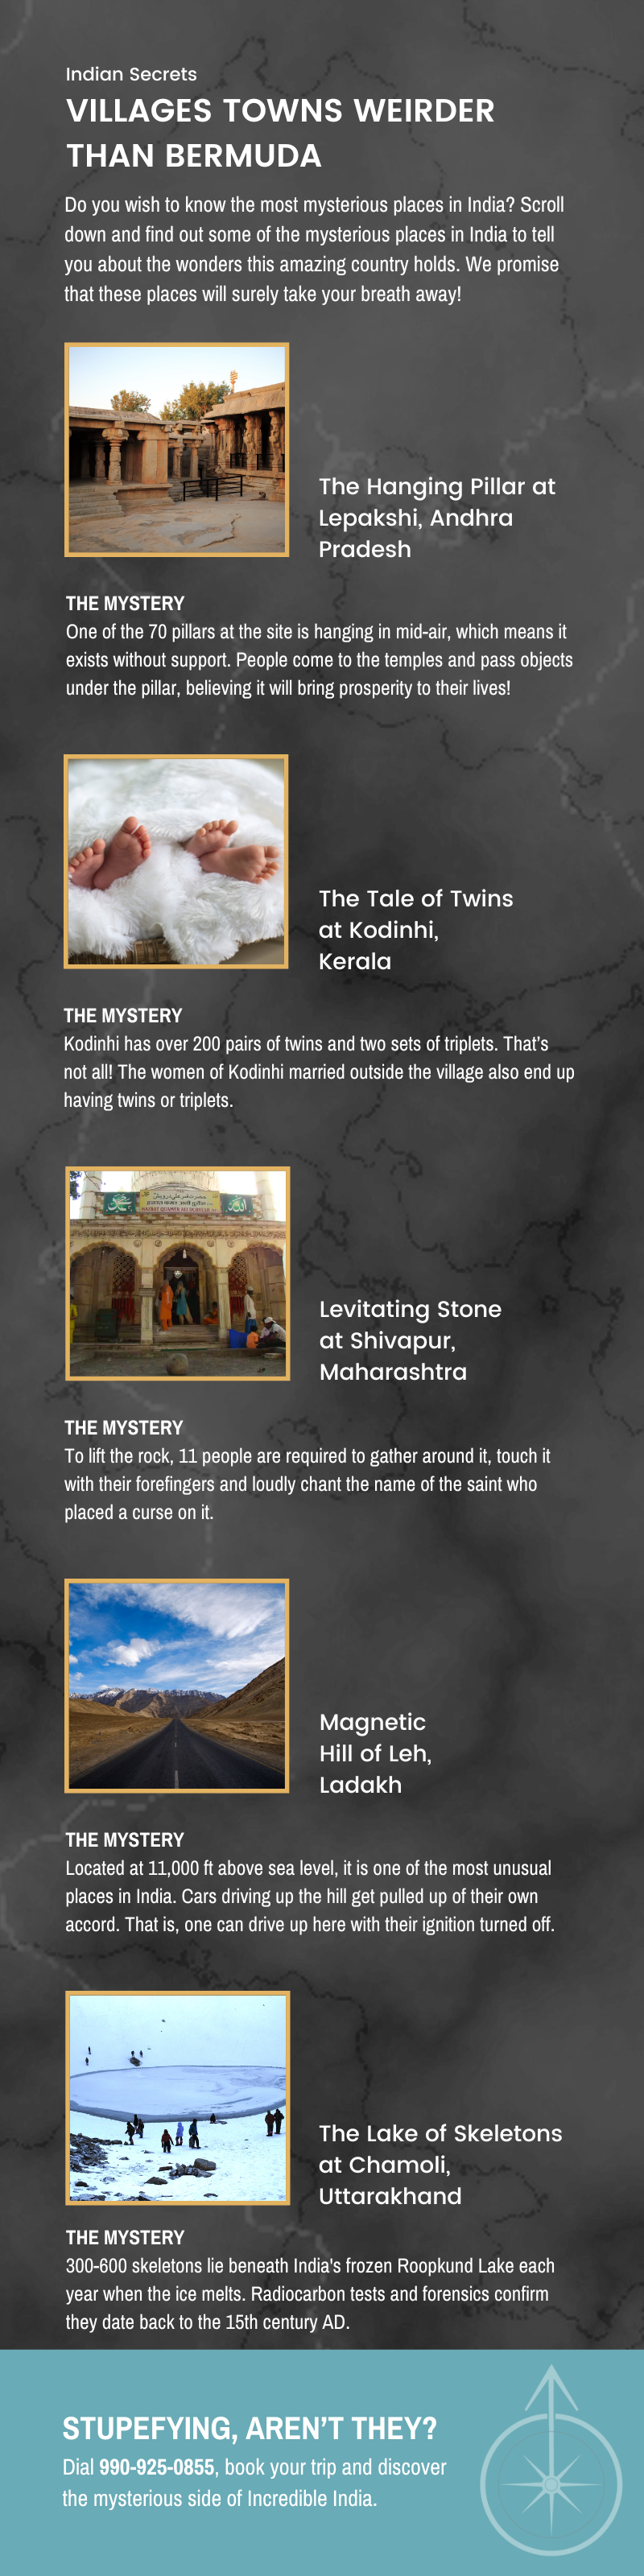 travel infographic on places more mysterious than bermuda triangle 